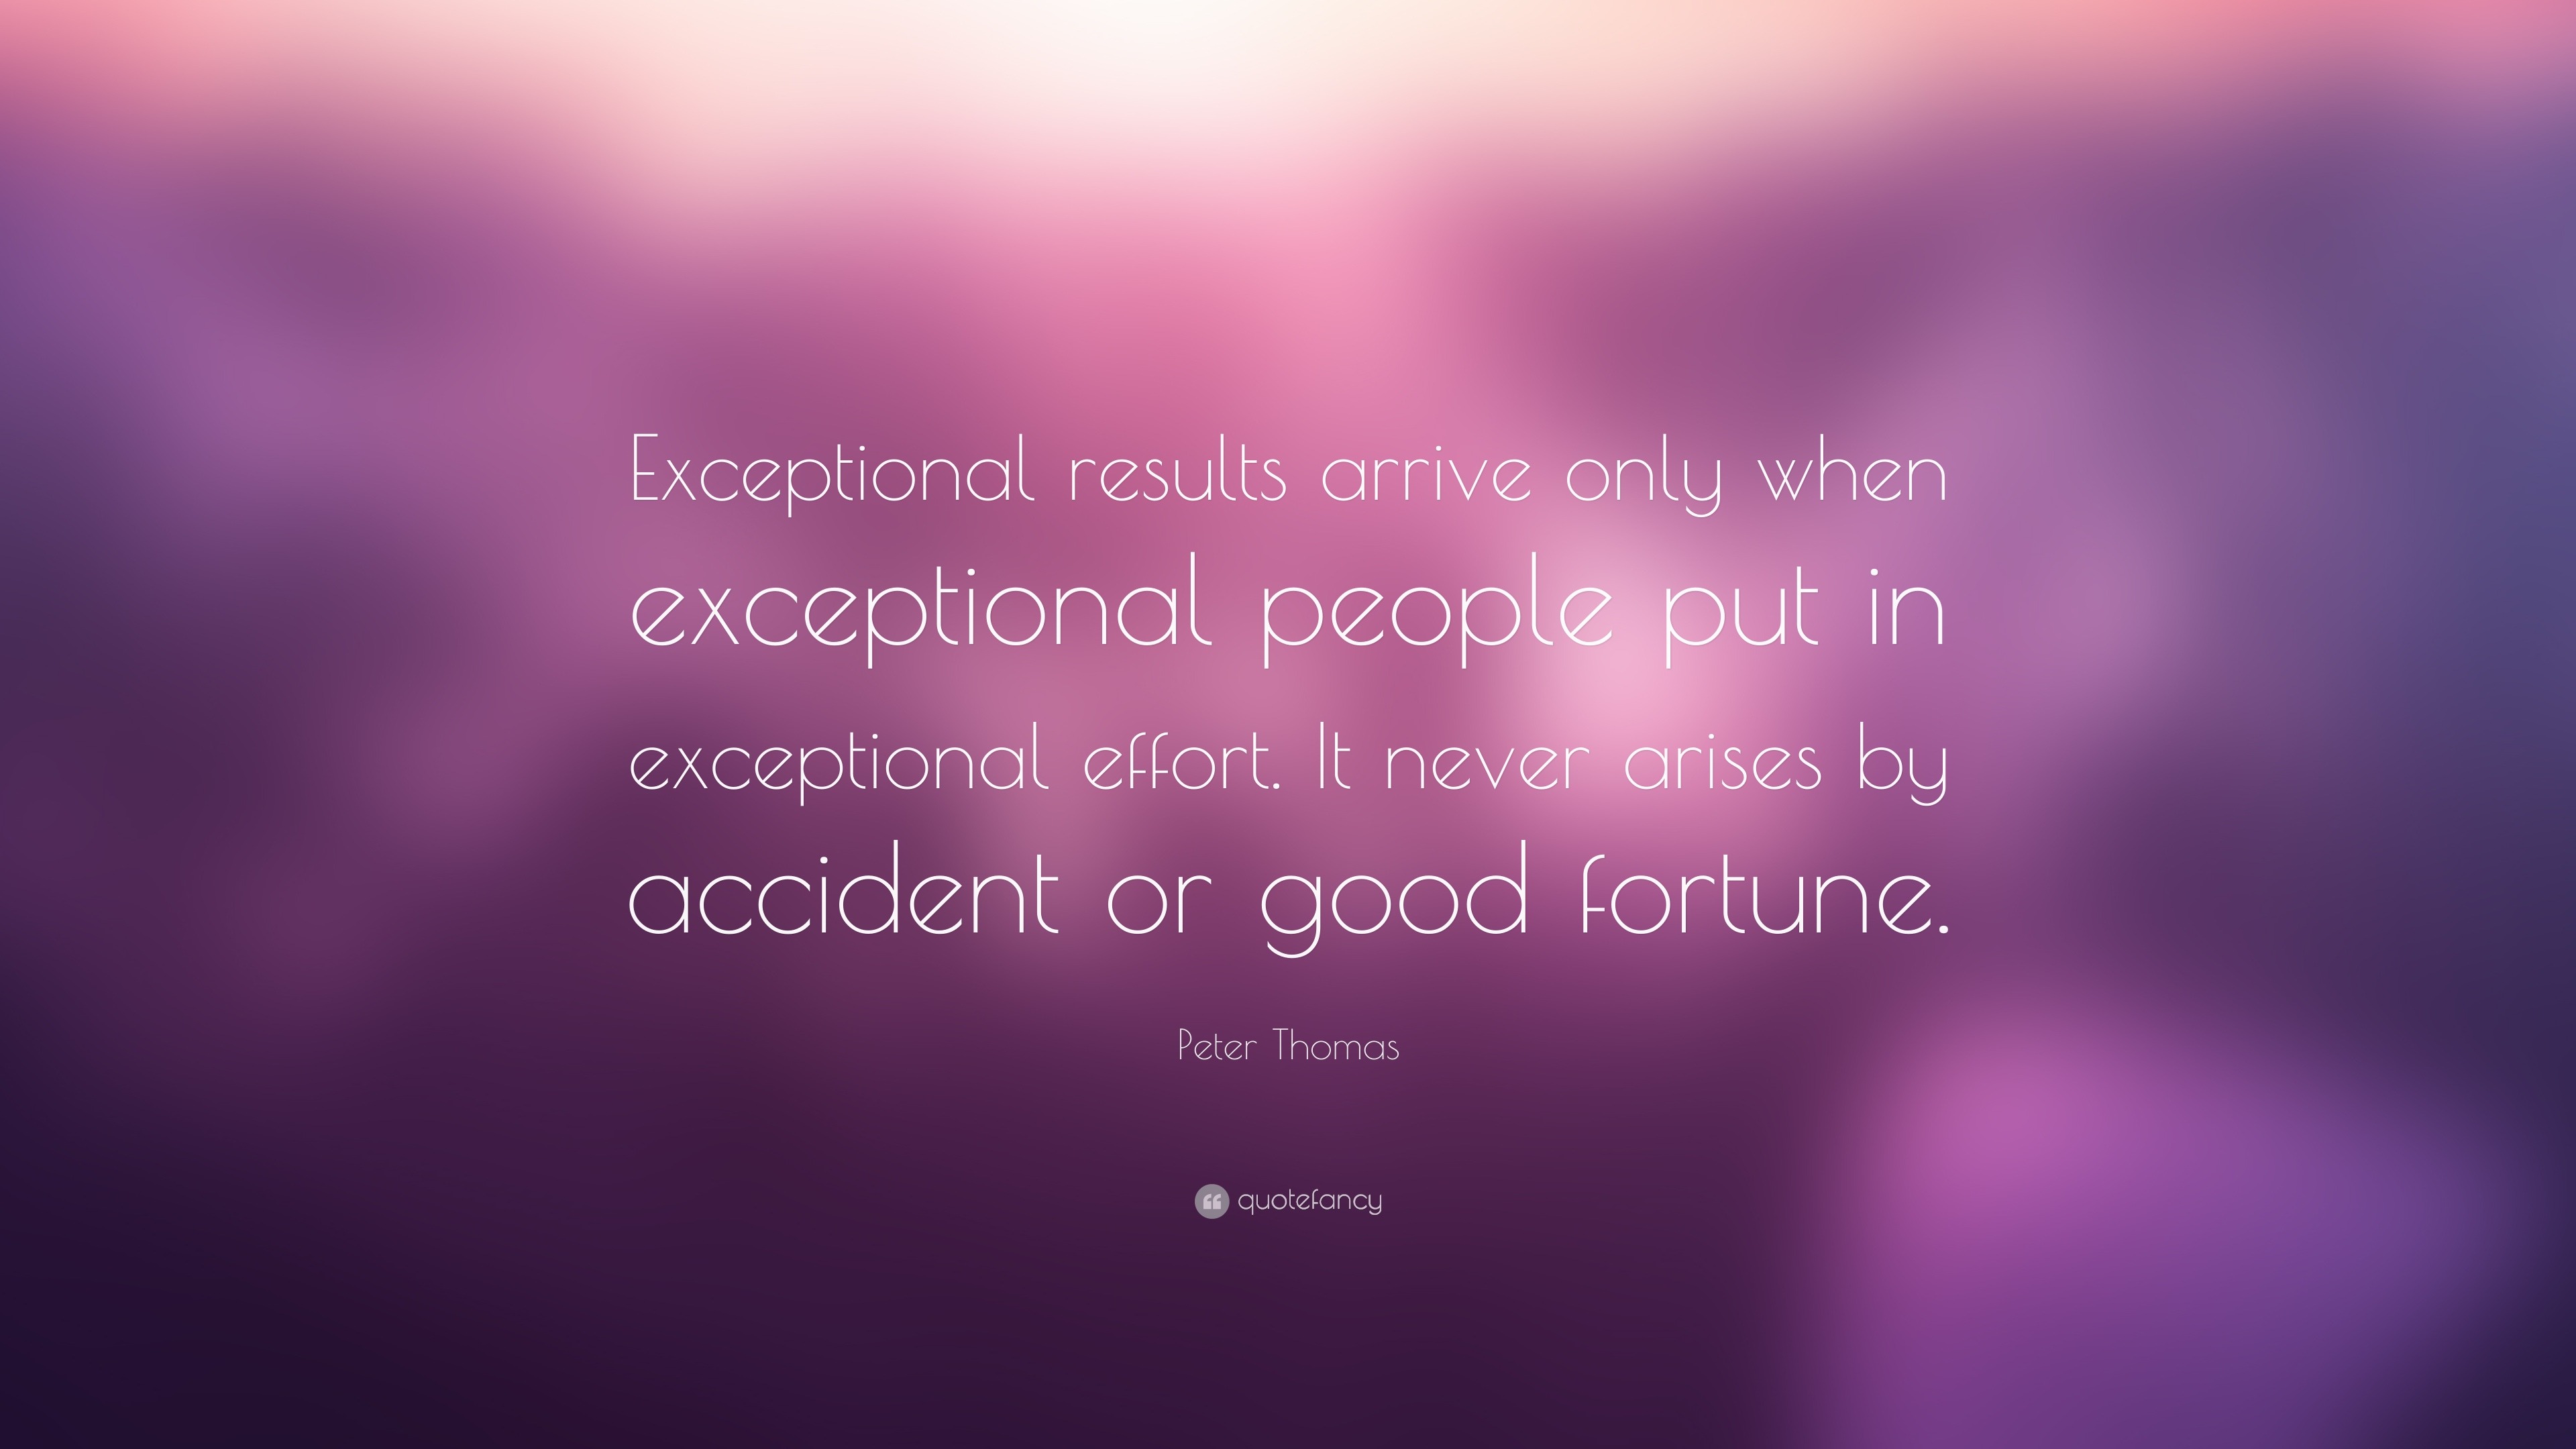 Peter Thomas Quote: “Exceptional results arrive only when exceptional